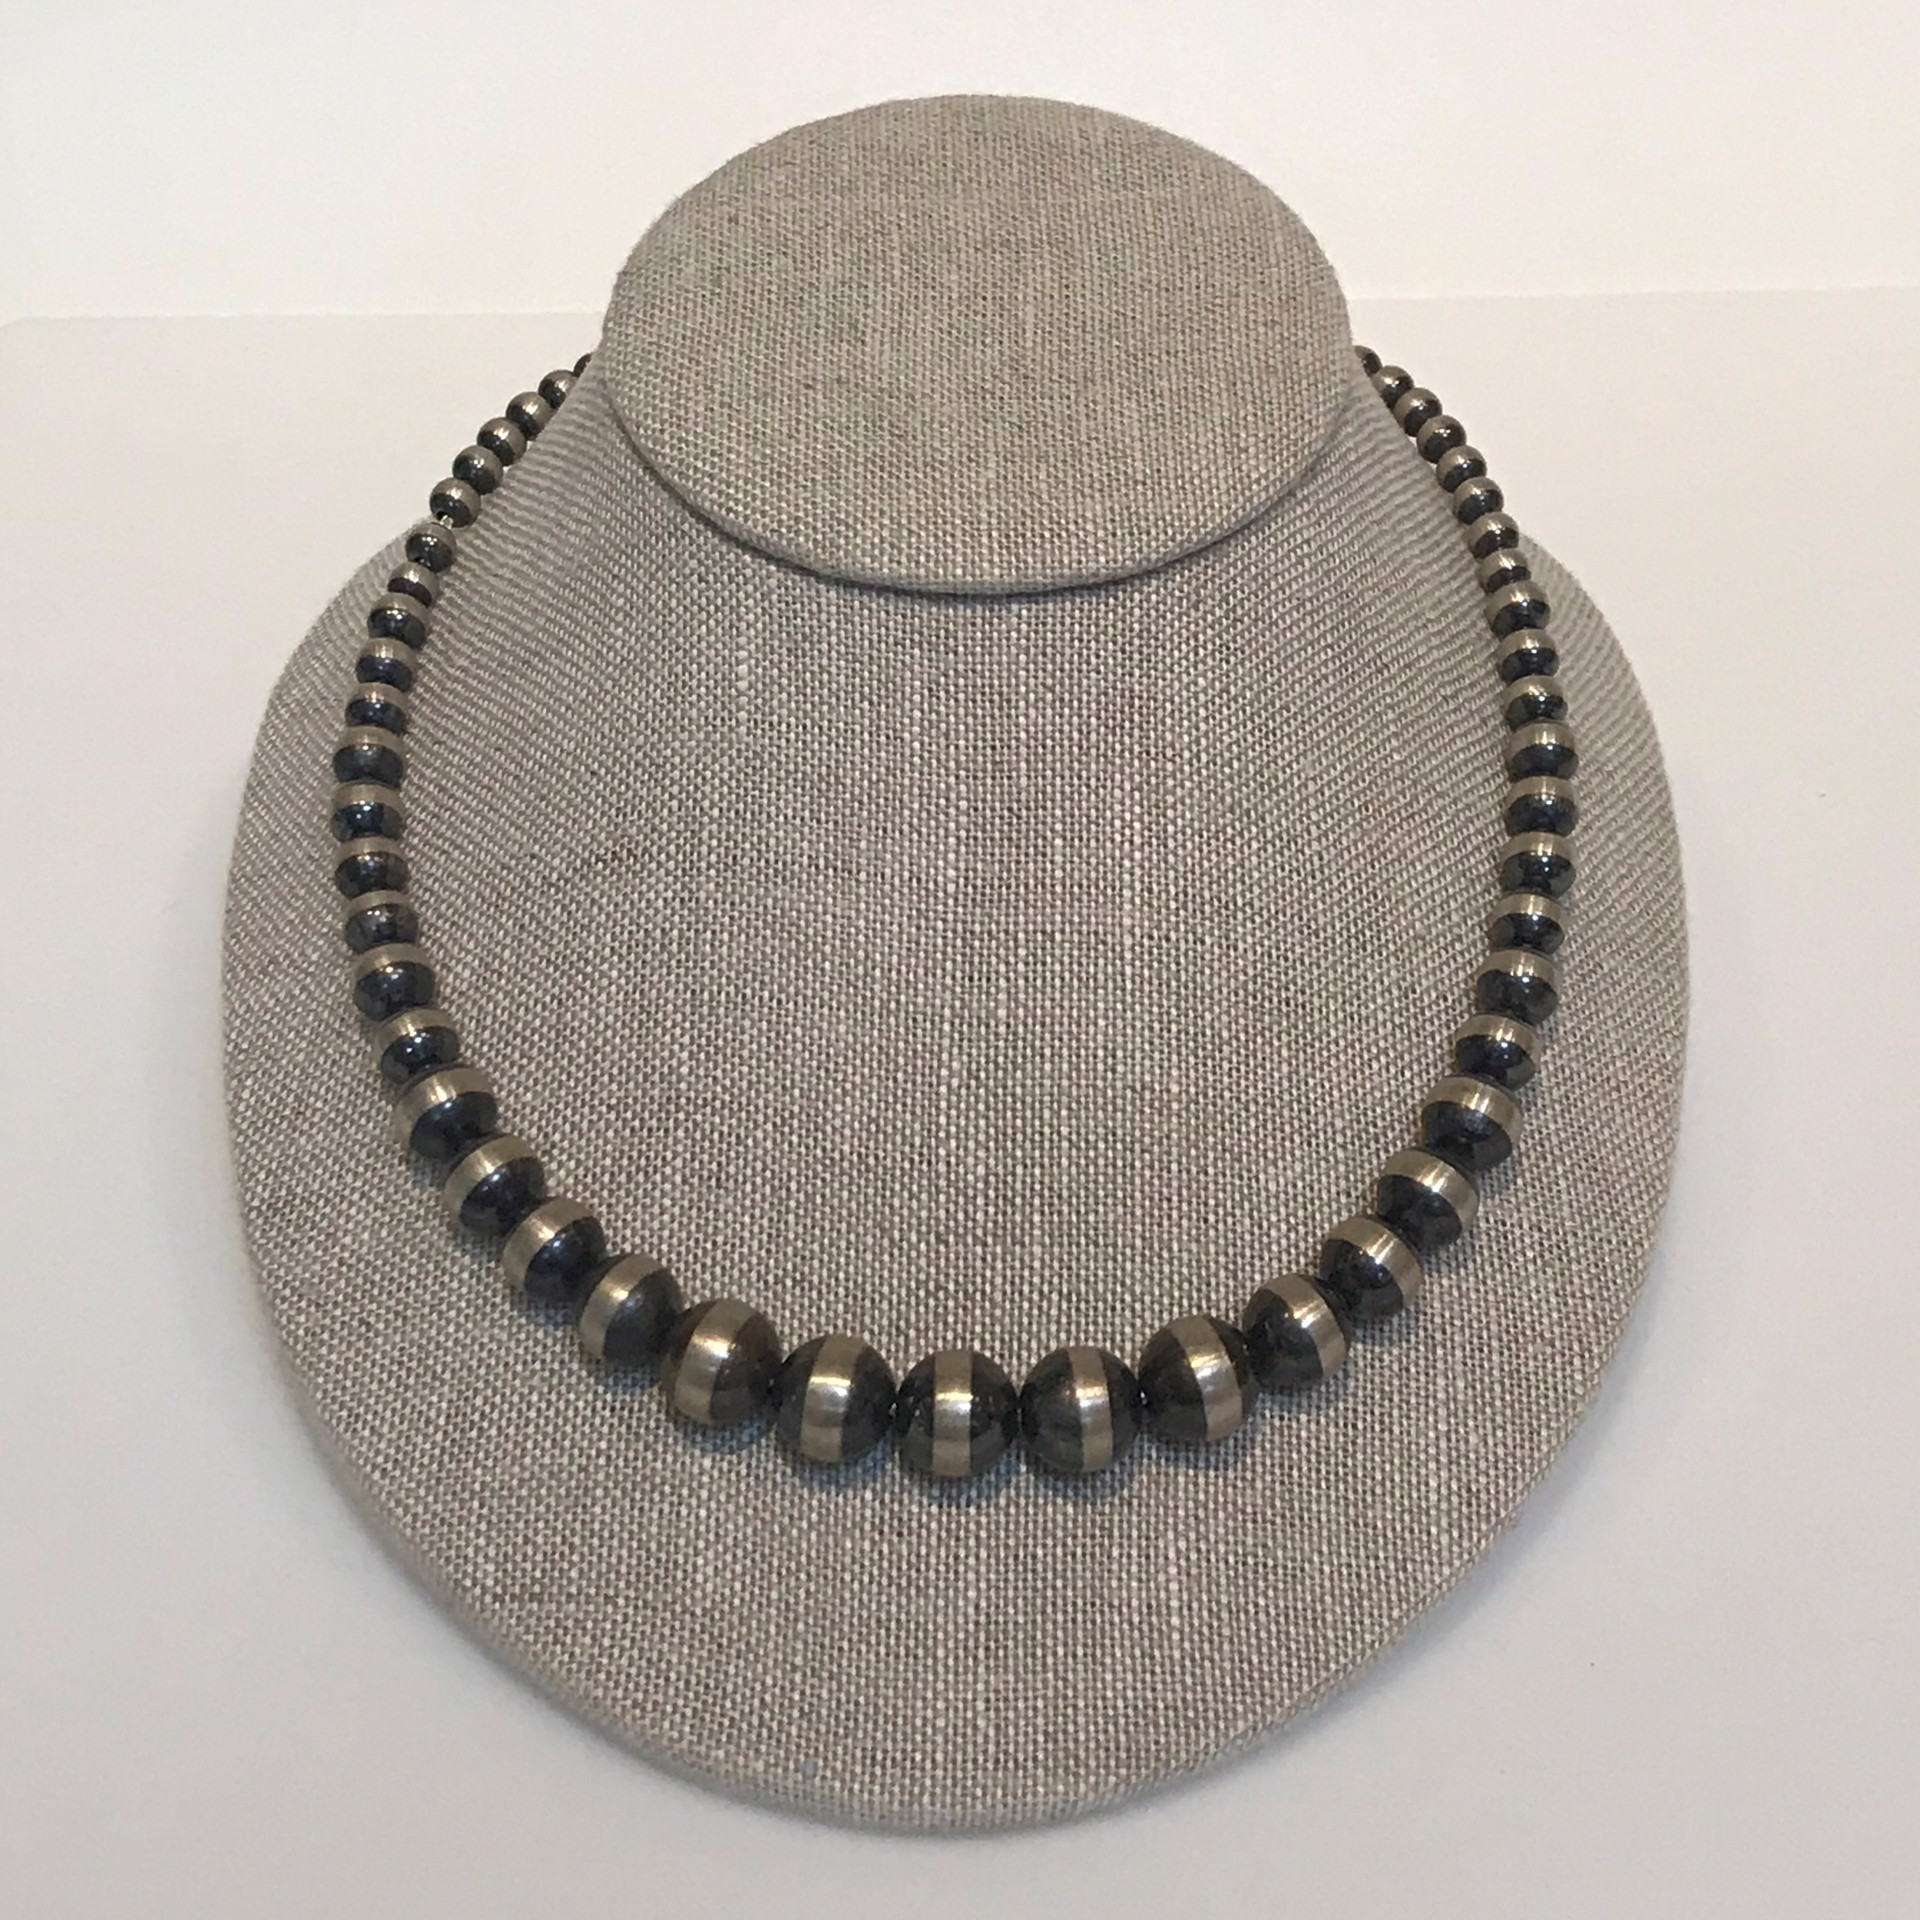 17" Oxidized Sterling Silver Necklace - 6mm -12mm by Suzanne Woodworth